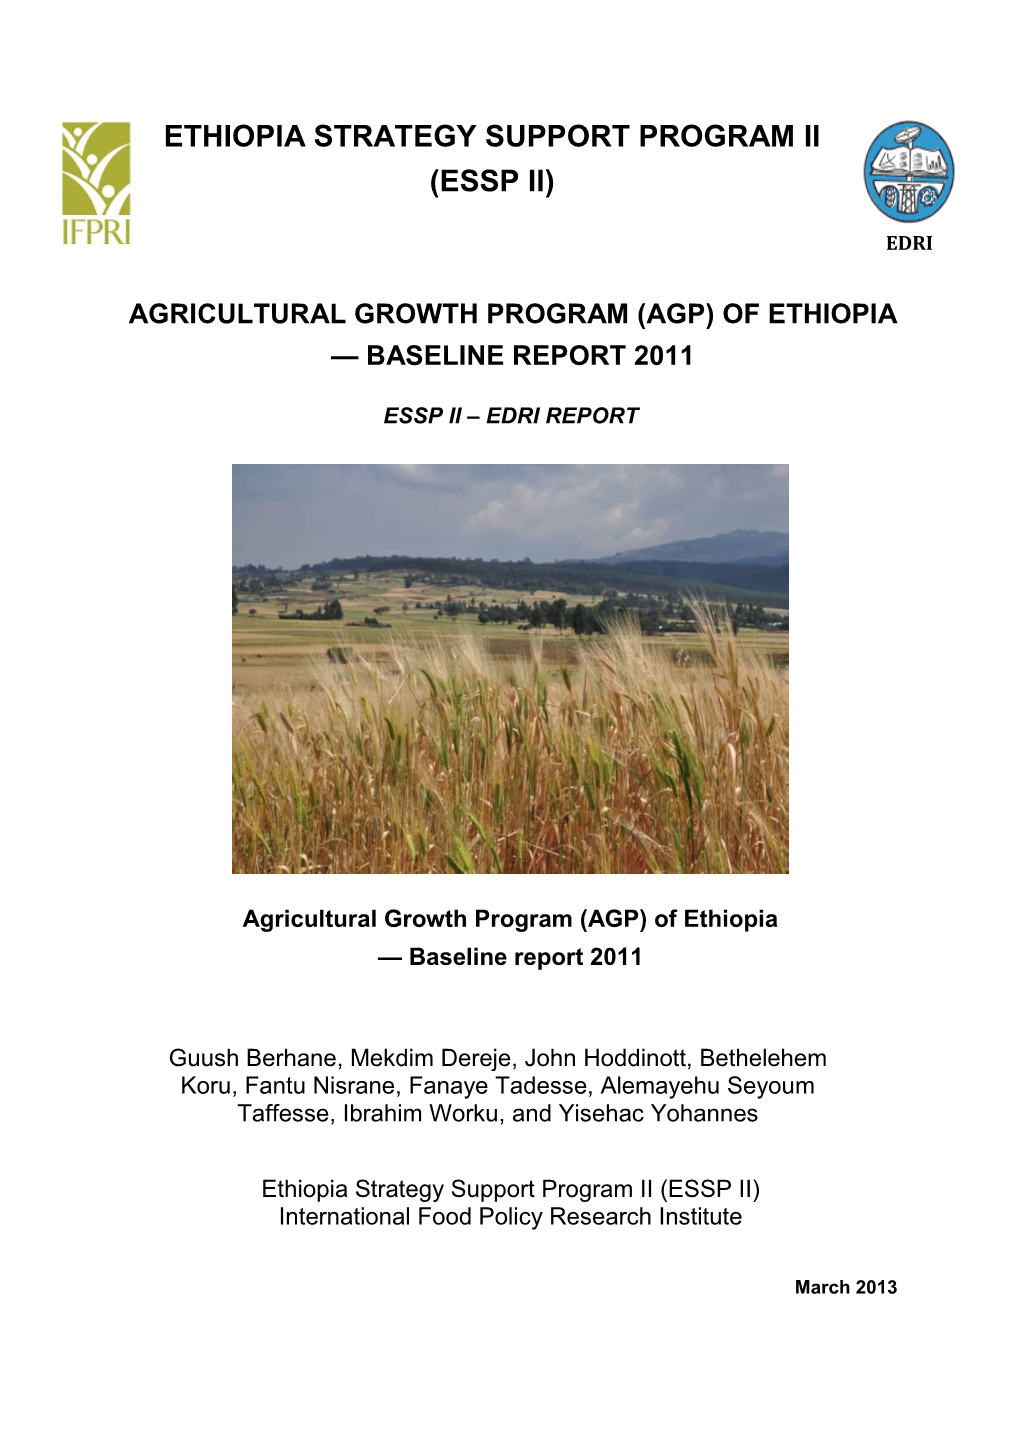 Agricultural Growth Program (Agp) of Ethiopia — Baseline Report 2011